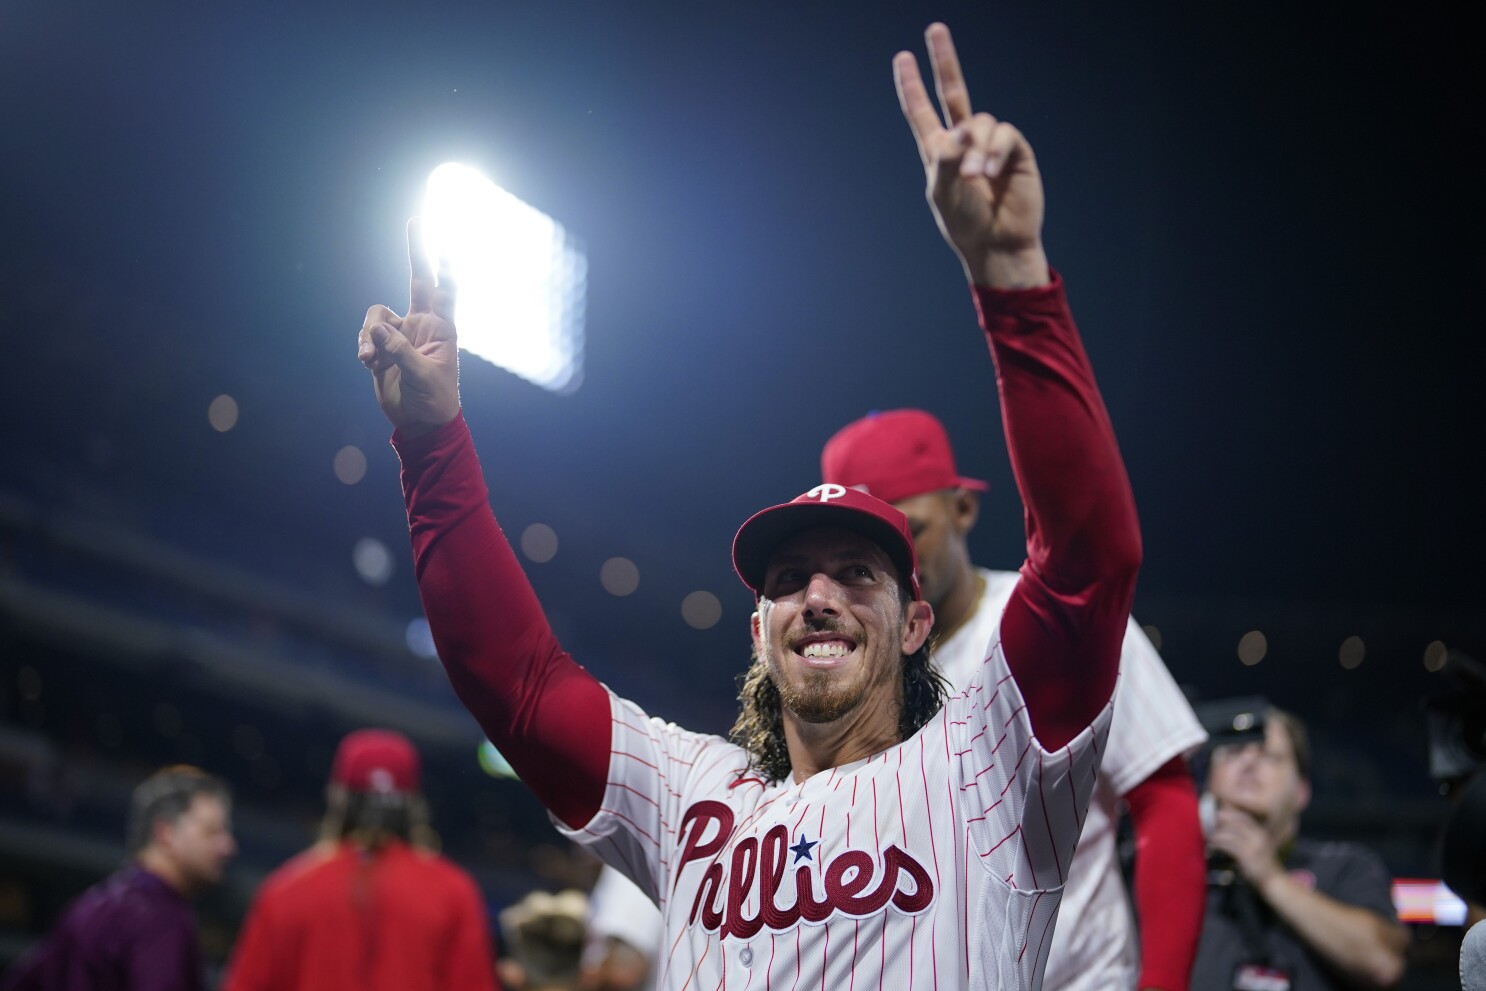 Phillies Fans Excited to Pick Up Postseason Gear After 11-Year Wait 